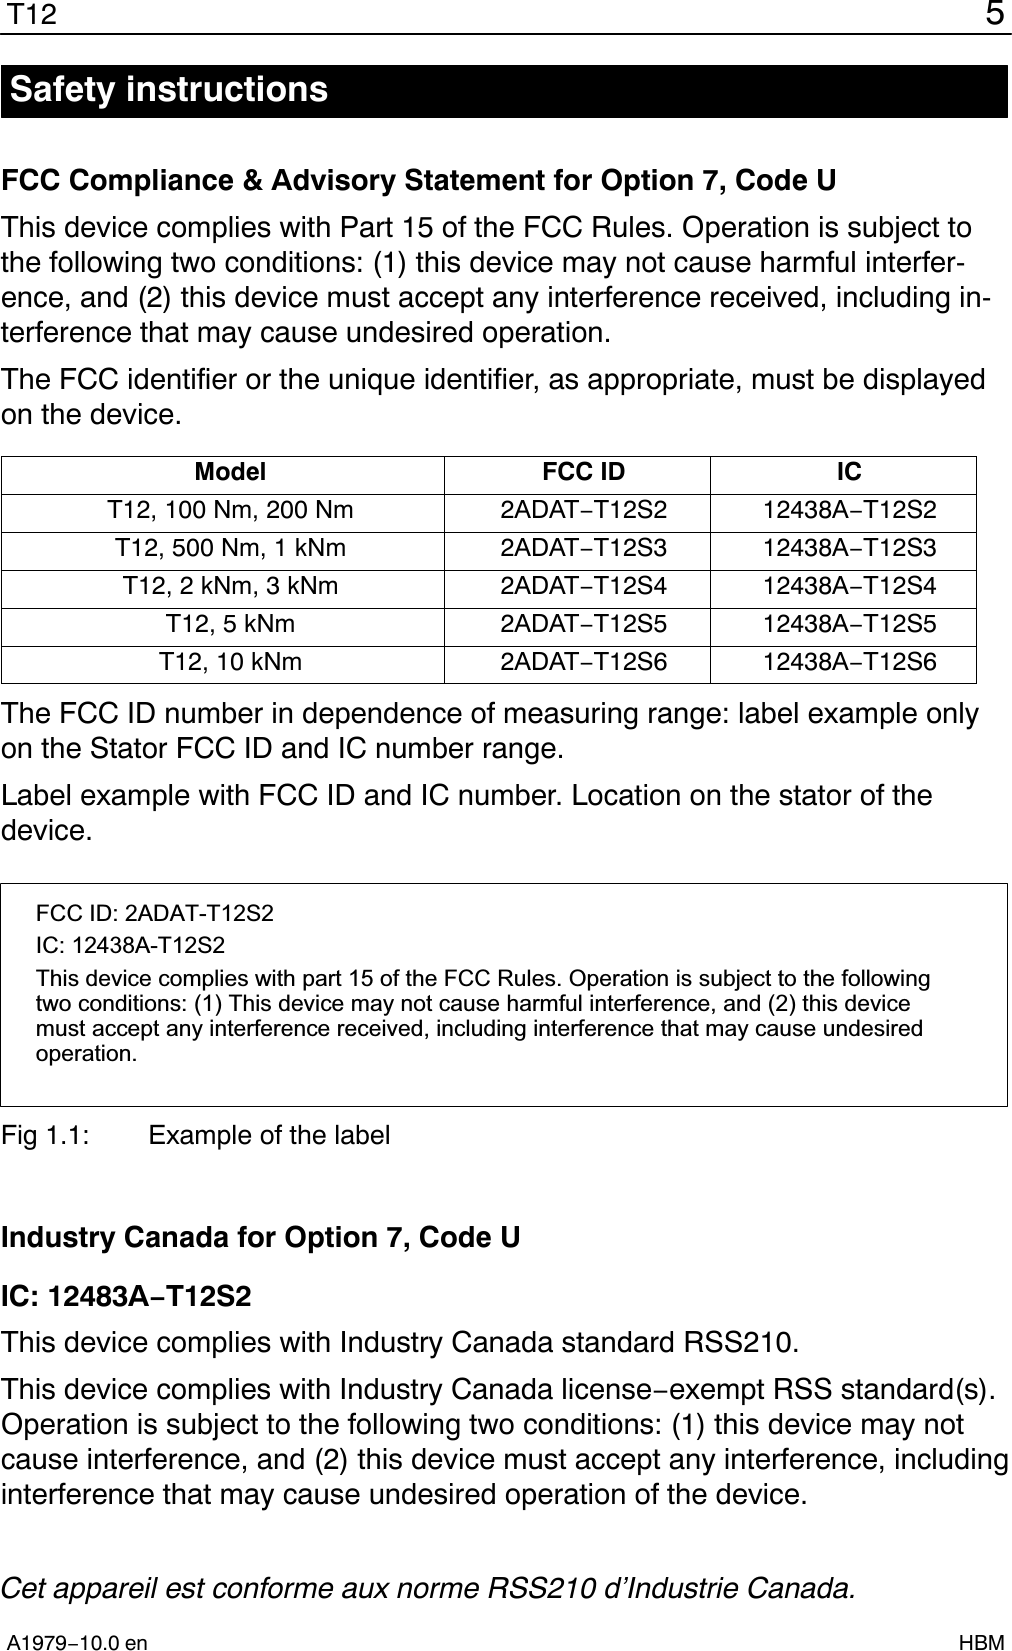 5T12A1979−10.0 en HBMSafety instructionsFCC Compliance &amp; Advisory Statement for Option 7, Code UThis device complies with Part 15 of the FCC Rules. Operation is subject tothe following two conditions: (1) this device may not cause harmful interfer-ence, and (2) this device must accept any interference received, including in-terference that may cause undesired operation.The FCC identifier or the unique identifier, as appropriate, must be displayedon the device.Model FCC ID ICT12, 100 Nm, 200 Nm 2ADAT−T12S2 12438A−T12S2T12, 500 Nm, 1 kNm 2ADAT−T12S3 12438A−T12S3T12, 2 kNm, 3 kNm 2ADAT−T12S4 12438A−T12S4T12, 5 kNm 2ADAT−T12S5 12438A−T12S5T12, 10 kNm 2ADAT−T12S6 12438A−T12S6The FCC ID number in dependence of measuring range: label example onlyon the Stator FCC ID and IC number range.Label example with FCC ID and IC number. Location on the stator of thedevice.FCC ID: 2ADAT-T12S2IC: 12438AT12S2This device complies with part 15 of the FCC Rules. Operation is subject to the followingtwo conditions: (1) This device may not cause harmful interference, and (2) this devicemust accept any interference received, including interference that may cause undesiredoperation.Fig 1.1: Example of the labelIndustry Canada for Option 7, Code UIC: 12483A−T12S2This device complies with Industry Canada standard RSS210.This device complies with Industry Canada license−exempt RSS standard(s).Operation is subject to the following two conditions: (1) this device may notcause interference, and (2) this device must accept any interference, includinginterference that may cause undesired operation of the device.Cet appareil est conforme aux norme RSS210 d’Industrie Canada.